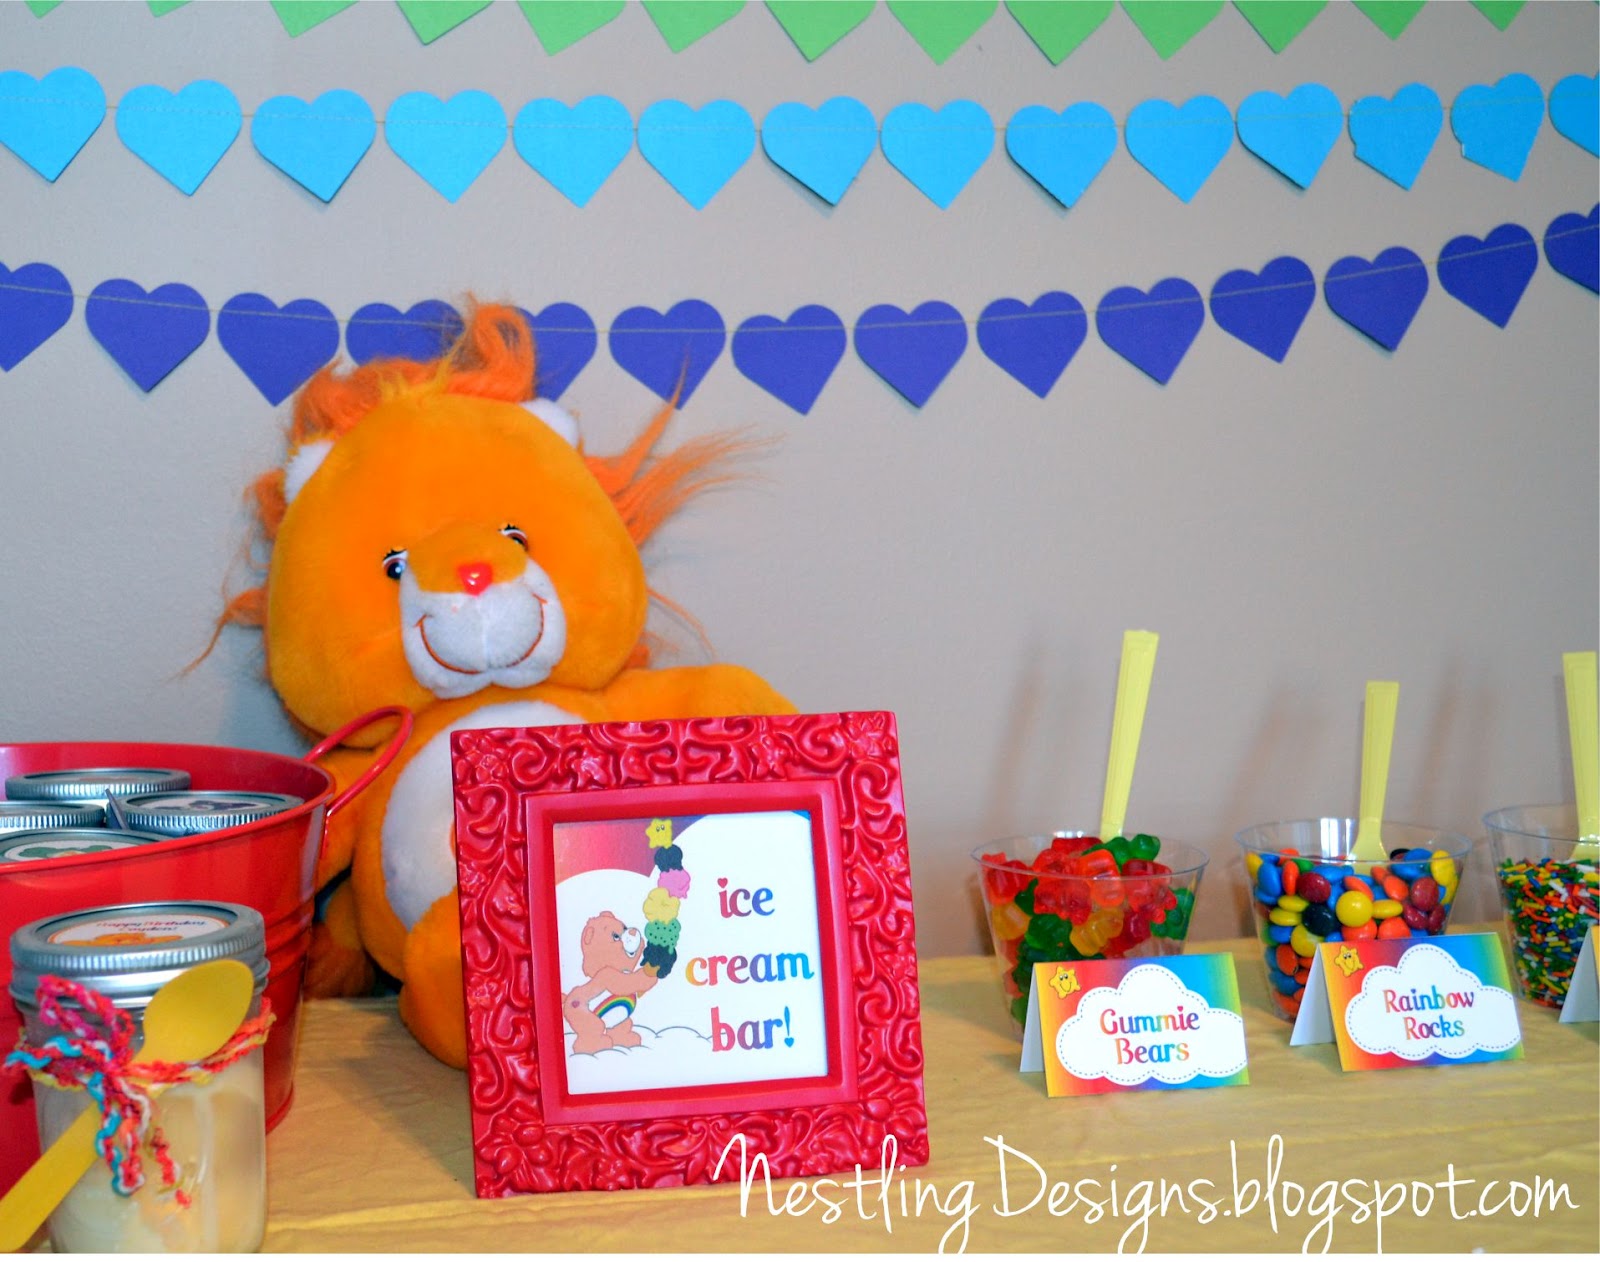 Nestling: Care Bear Party Reveal